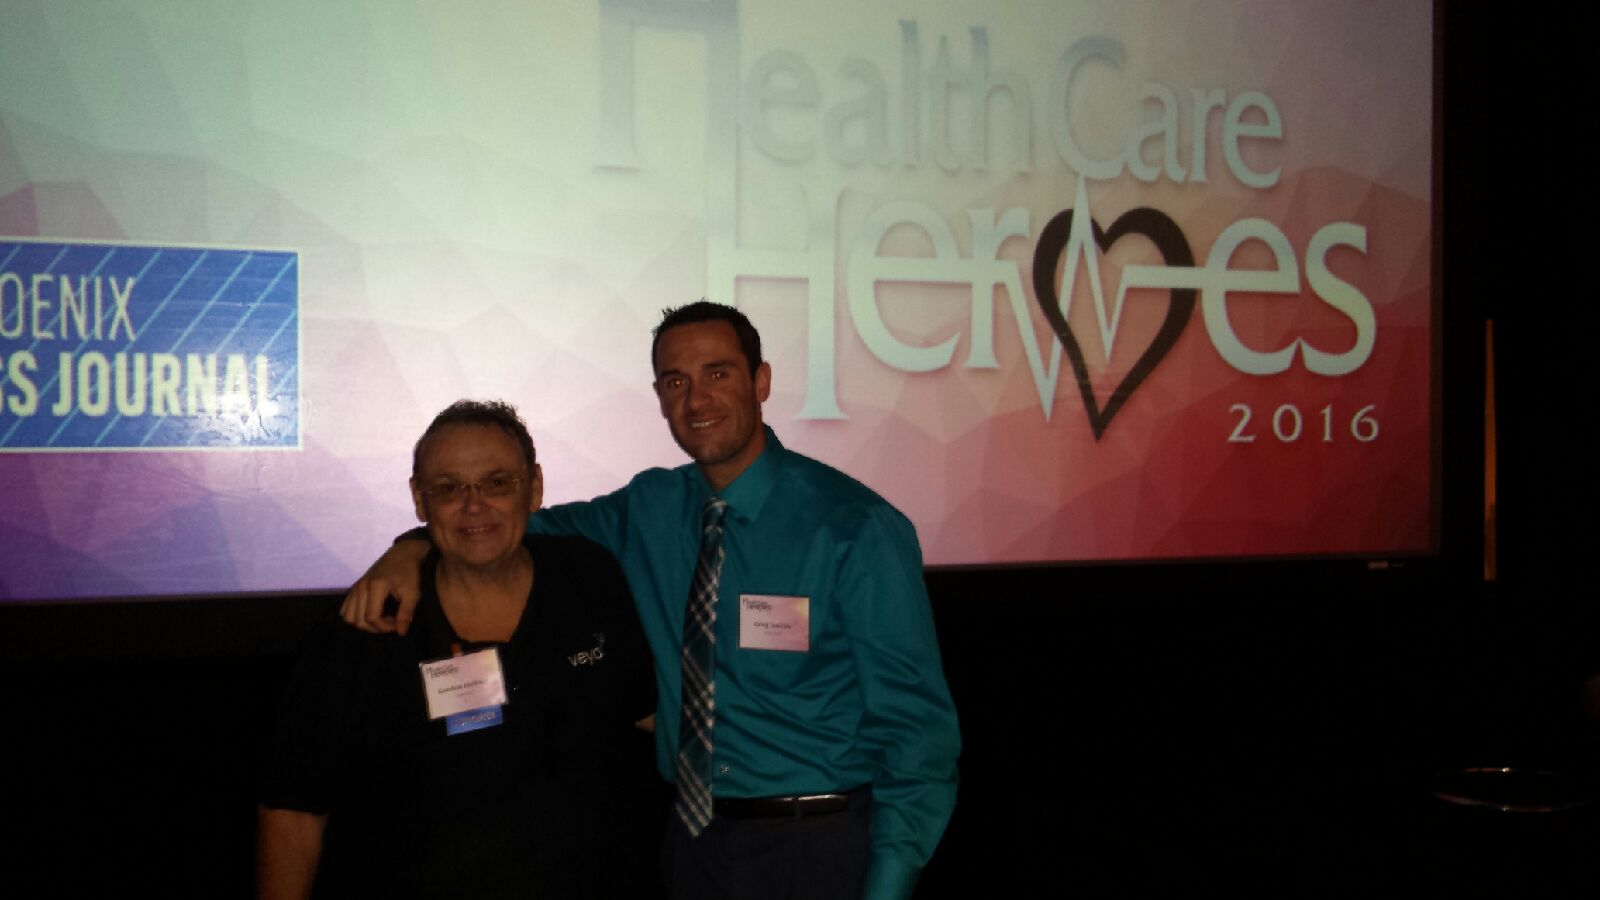 Gordon Diebler nominated for the Phoenix Business Journal Health Care Heroes Award